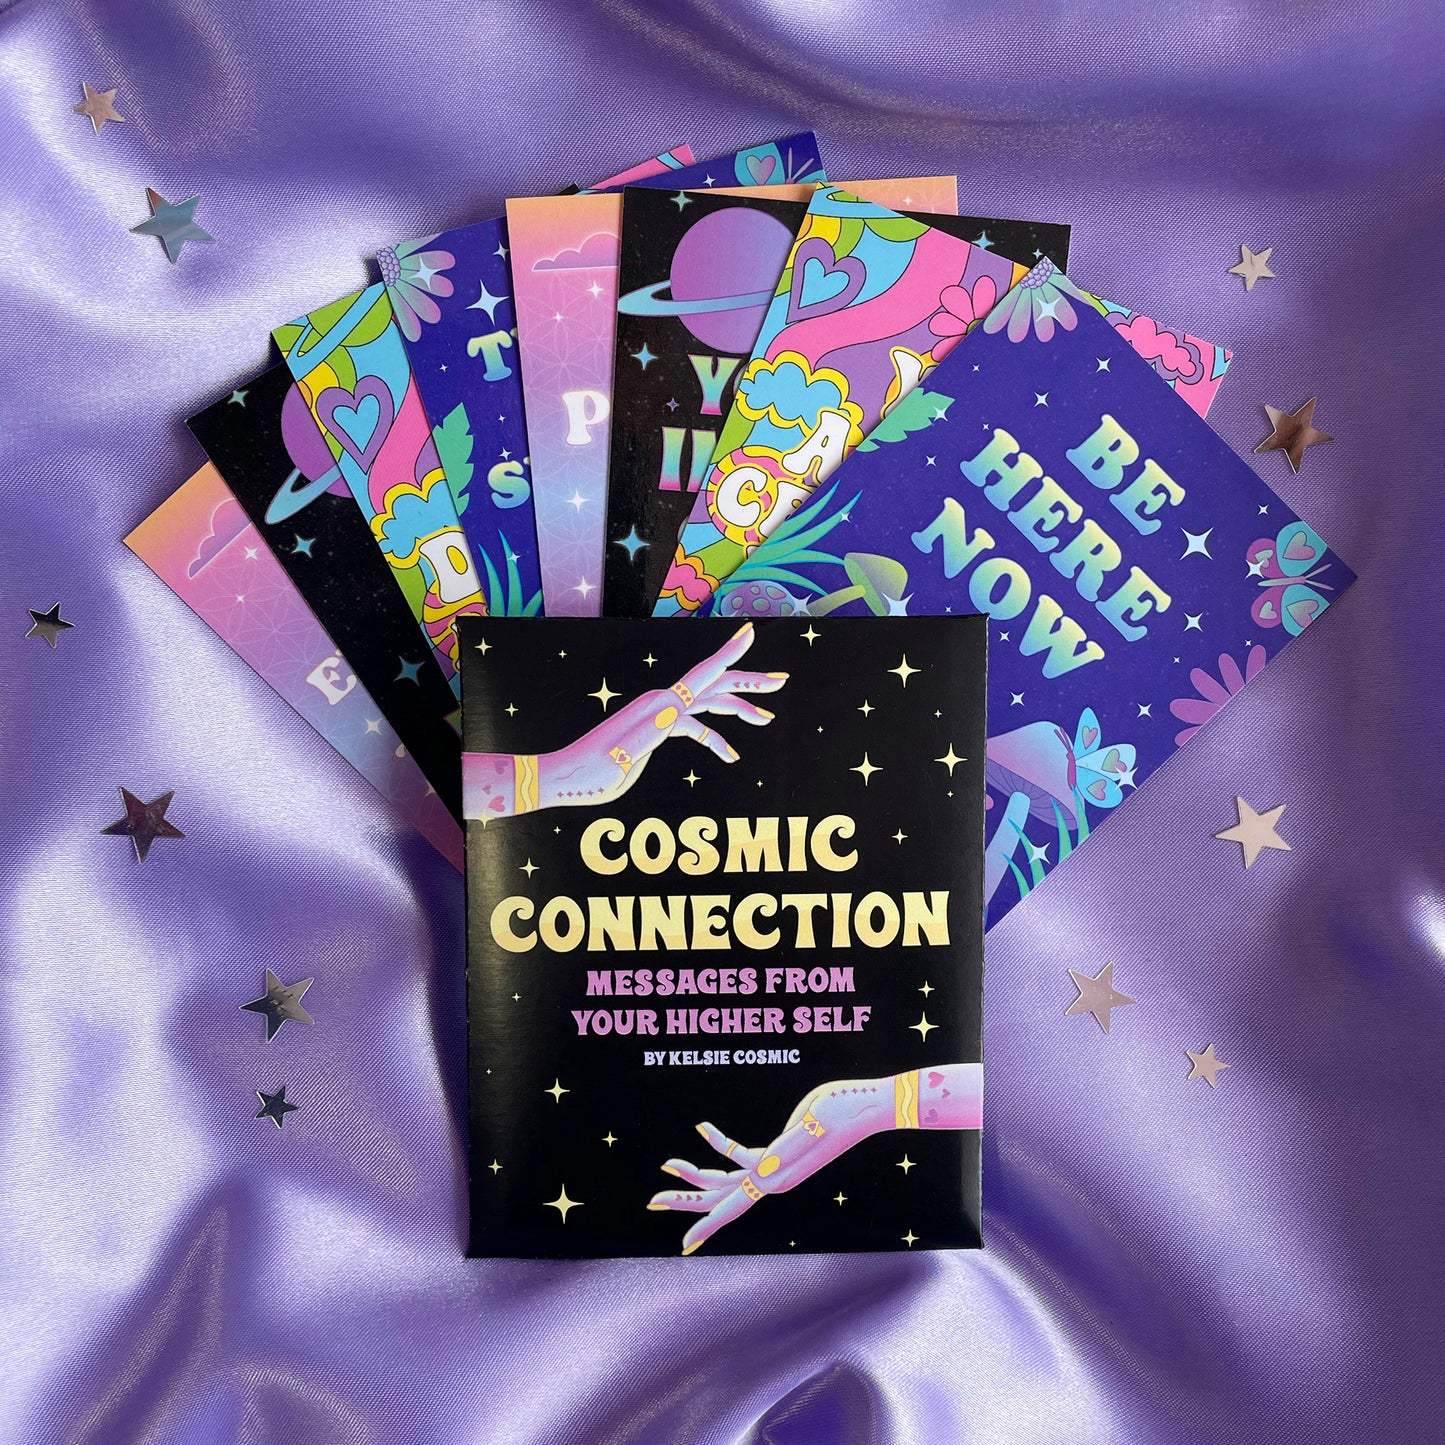 Cosmic Connection Pocket Pick Me Up